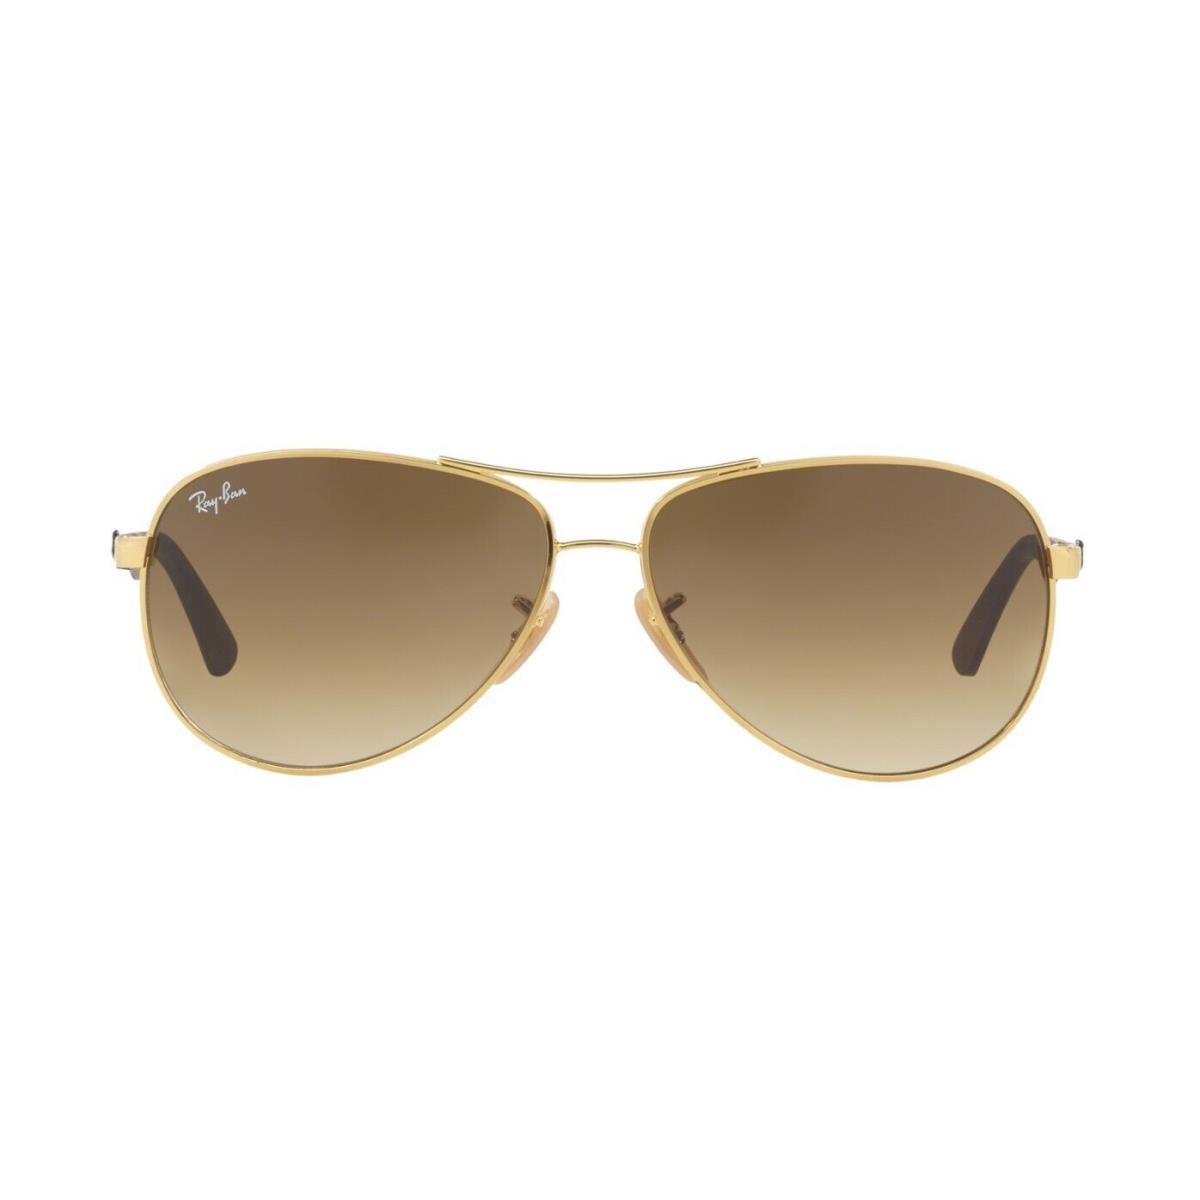 Ray-ban RB 8313 Gold/brown Shaded 001/51 C Sunglasses